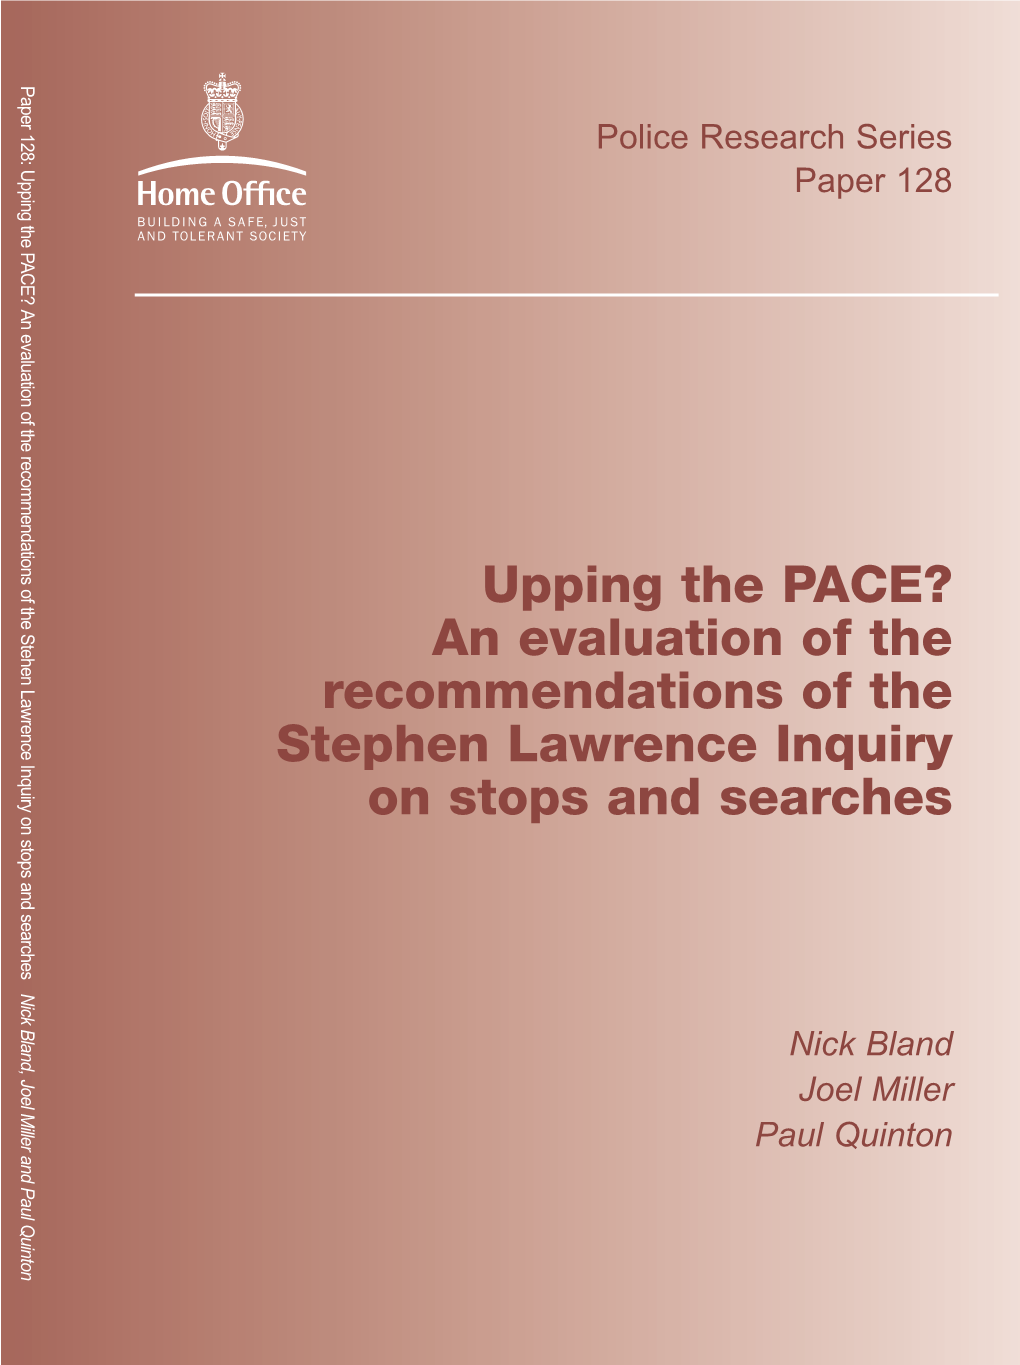 An Evaluation of the Recommendations of the Stephen Lawrence Inquiry on Stops and Searches Nick Bland, Joel Miller and Paul Quinton